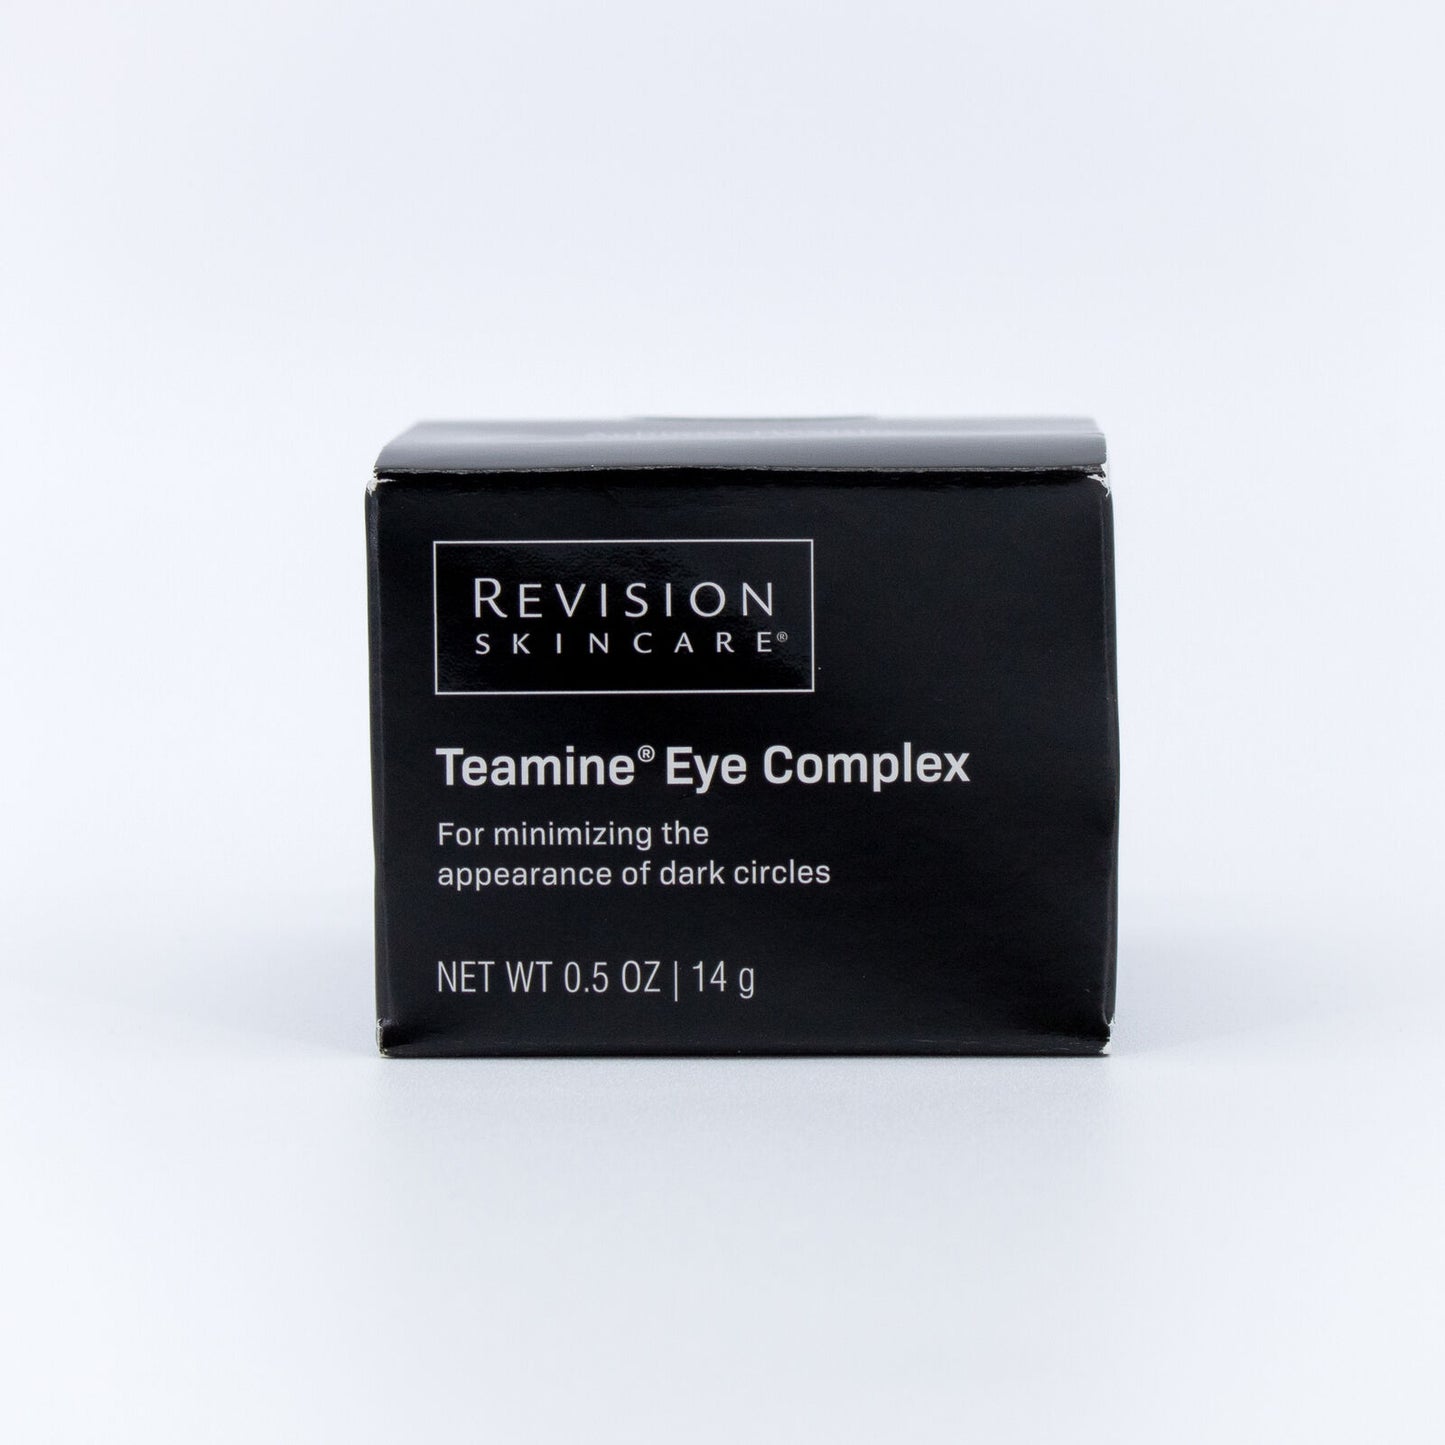 REVISION SKINCARE Teamine Eye Complex 0.5oz - Imperfect Box